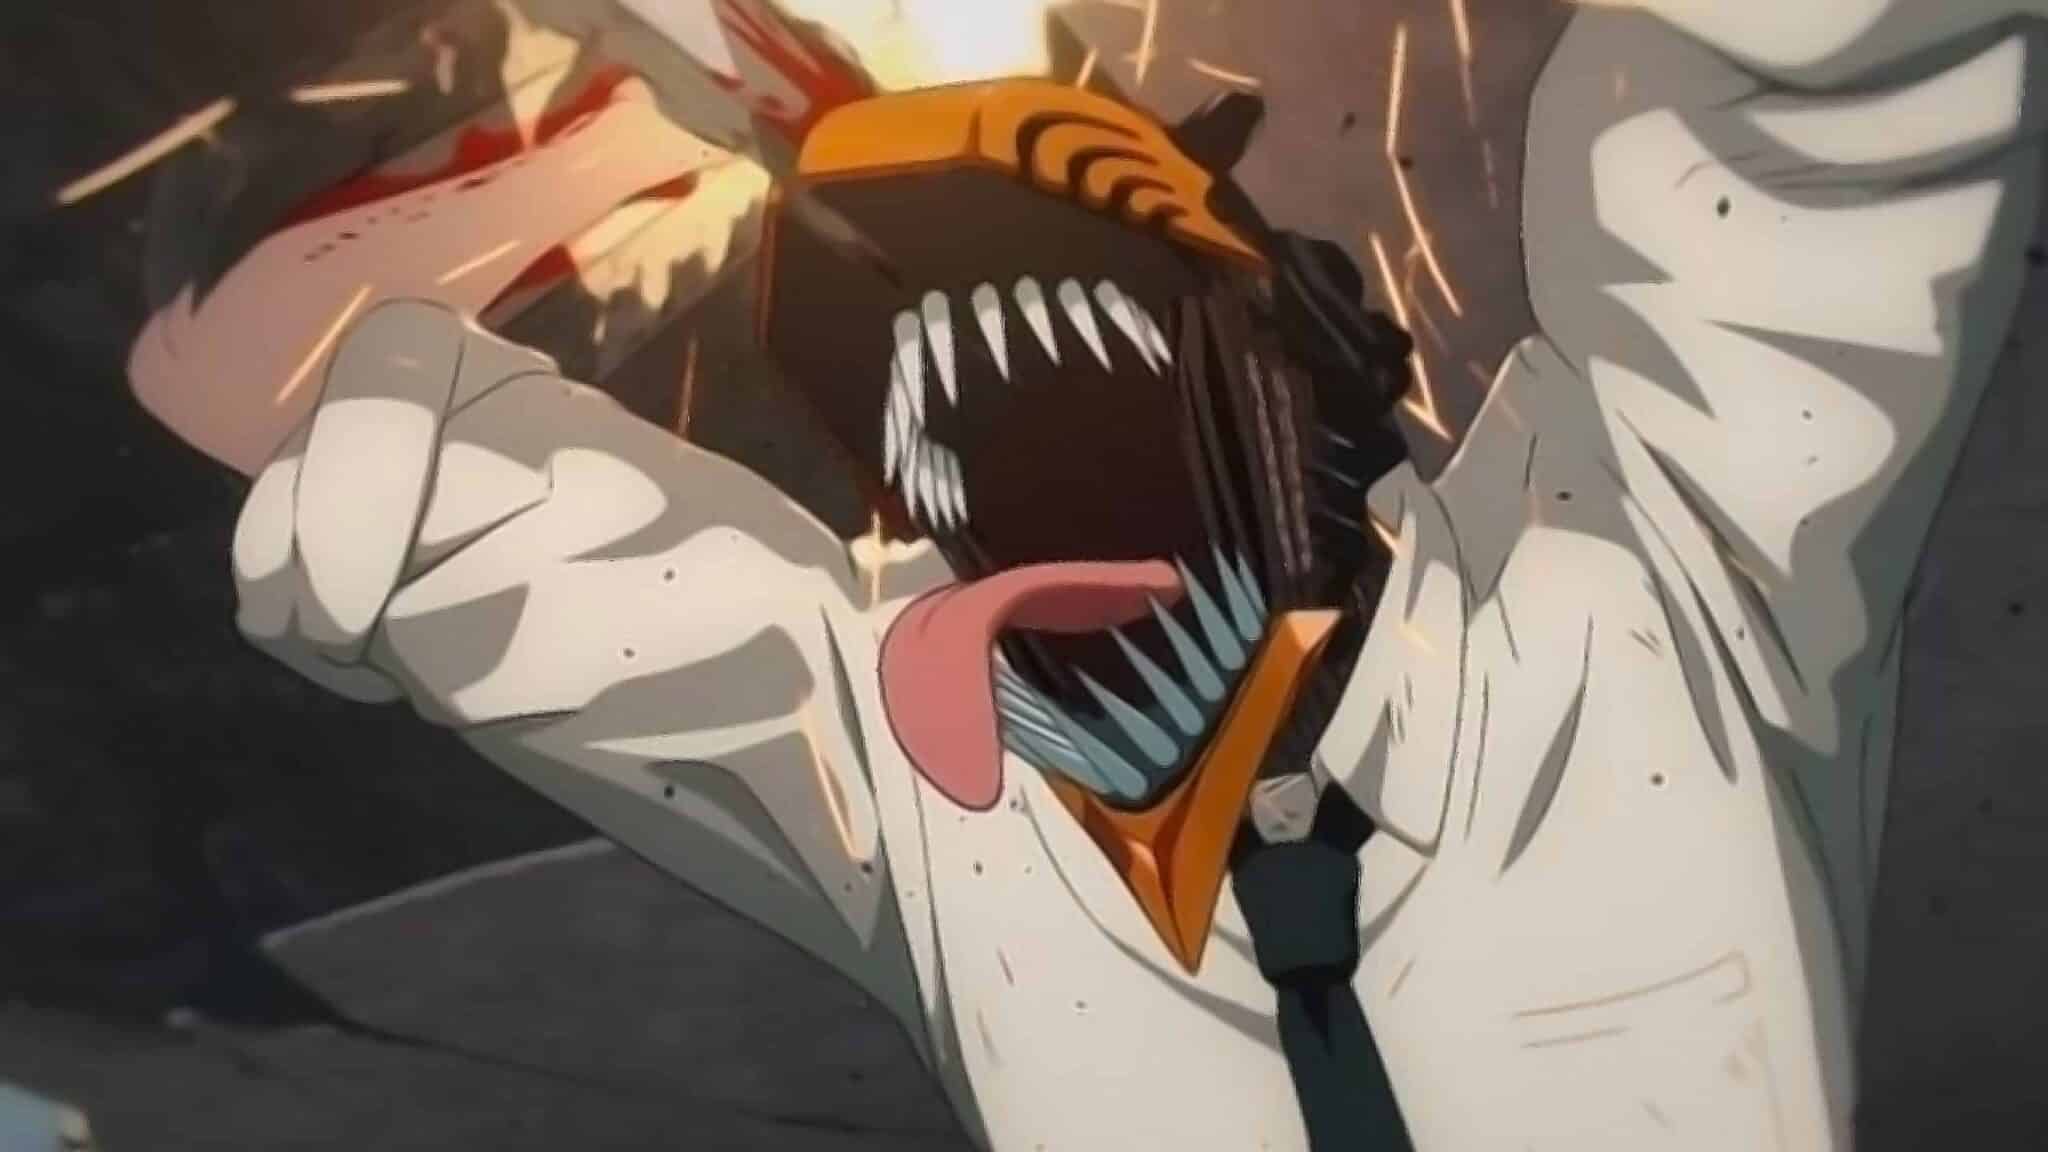 Will There Be a Season 2 of Chainsaw Man?